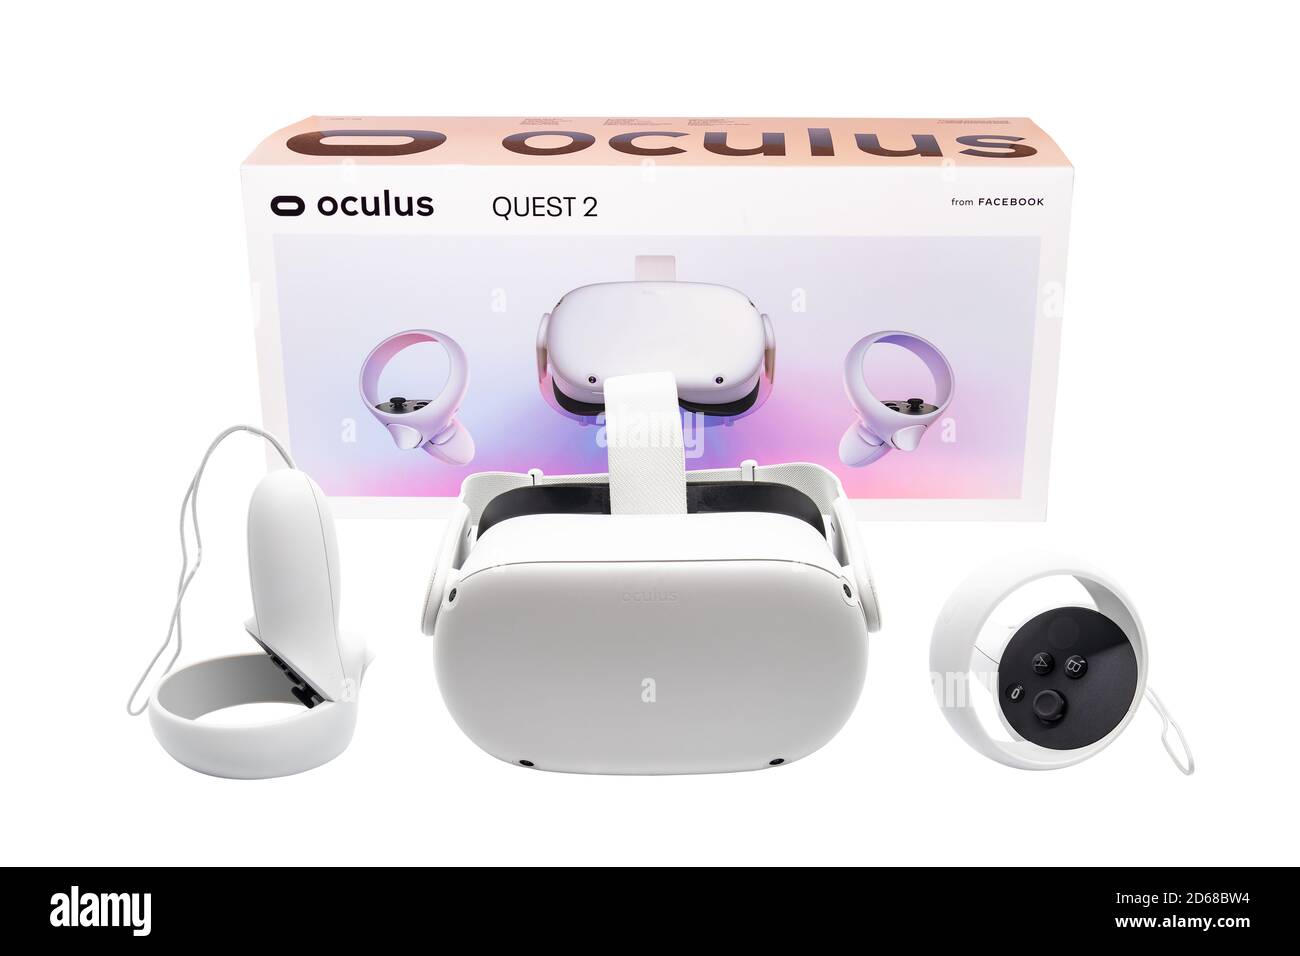 Huelva, Spain - October 14, 2020: Oculus Quest 2, the next generation of all-in-one VR. With a redesigned all-in-one form factor, new Touch controller Stock Photo